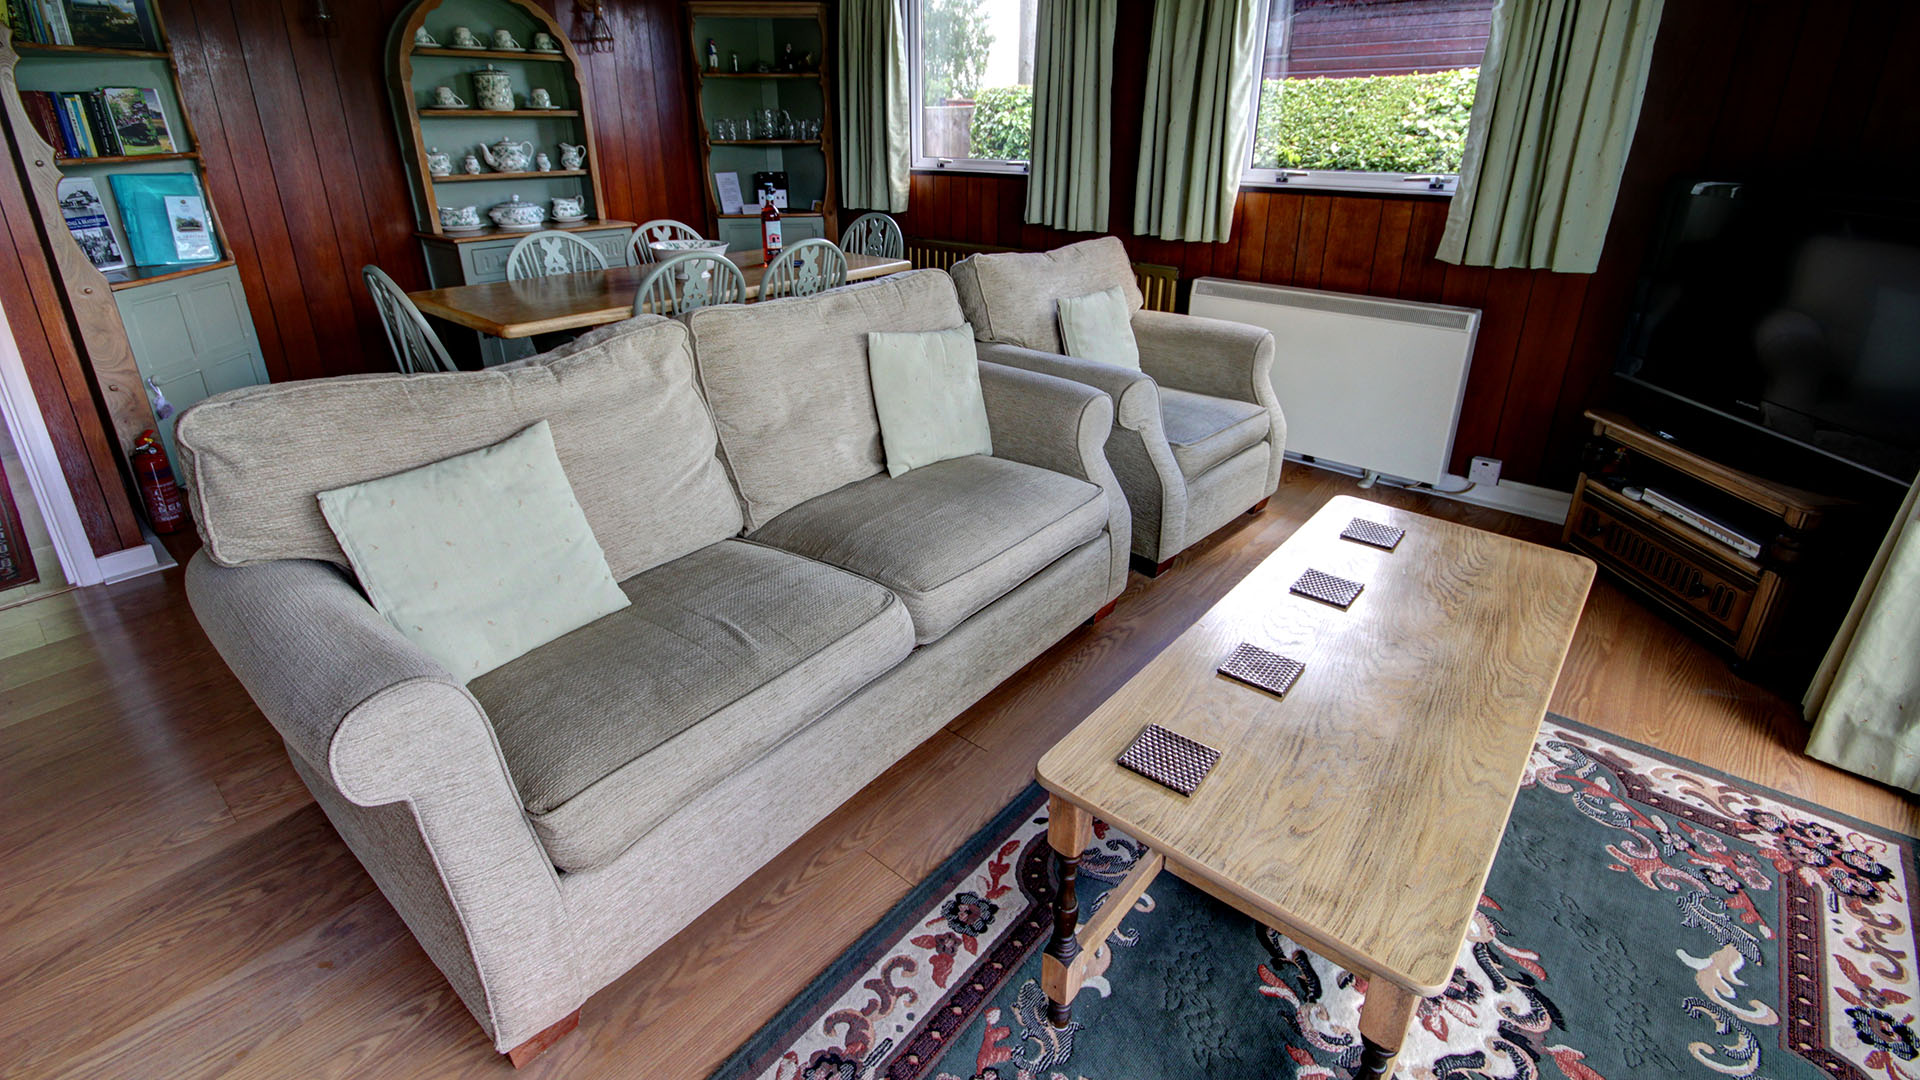 Inside our riverside bungalow on the river yare, brundall marina, norfolk